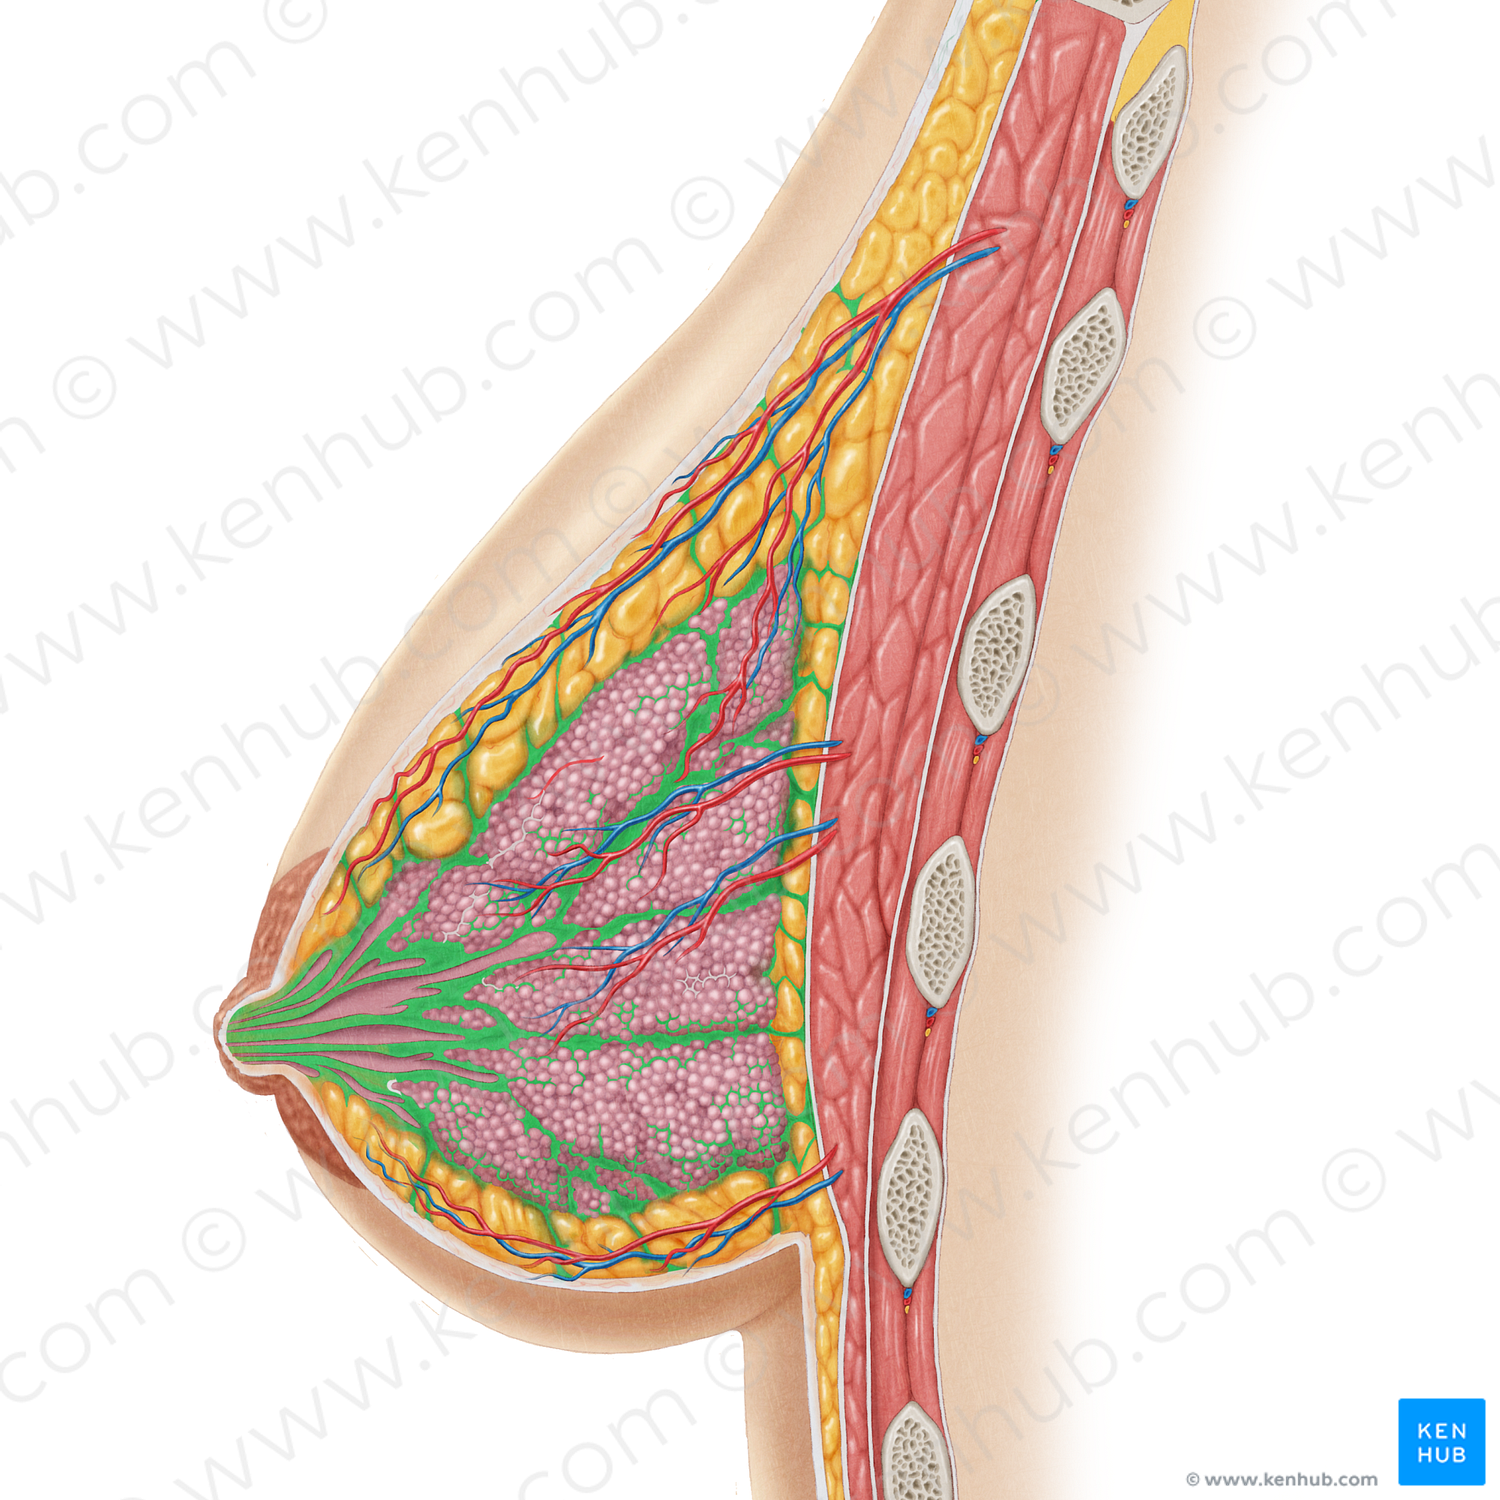 Suspensory ligaments of breast (#4465)